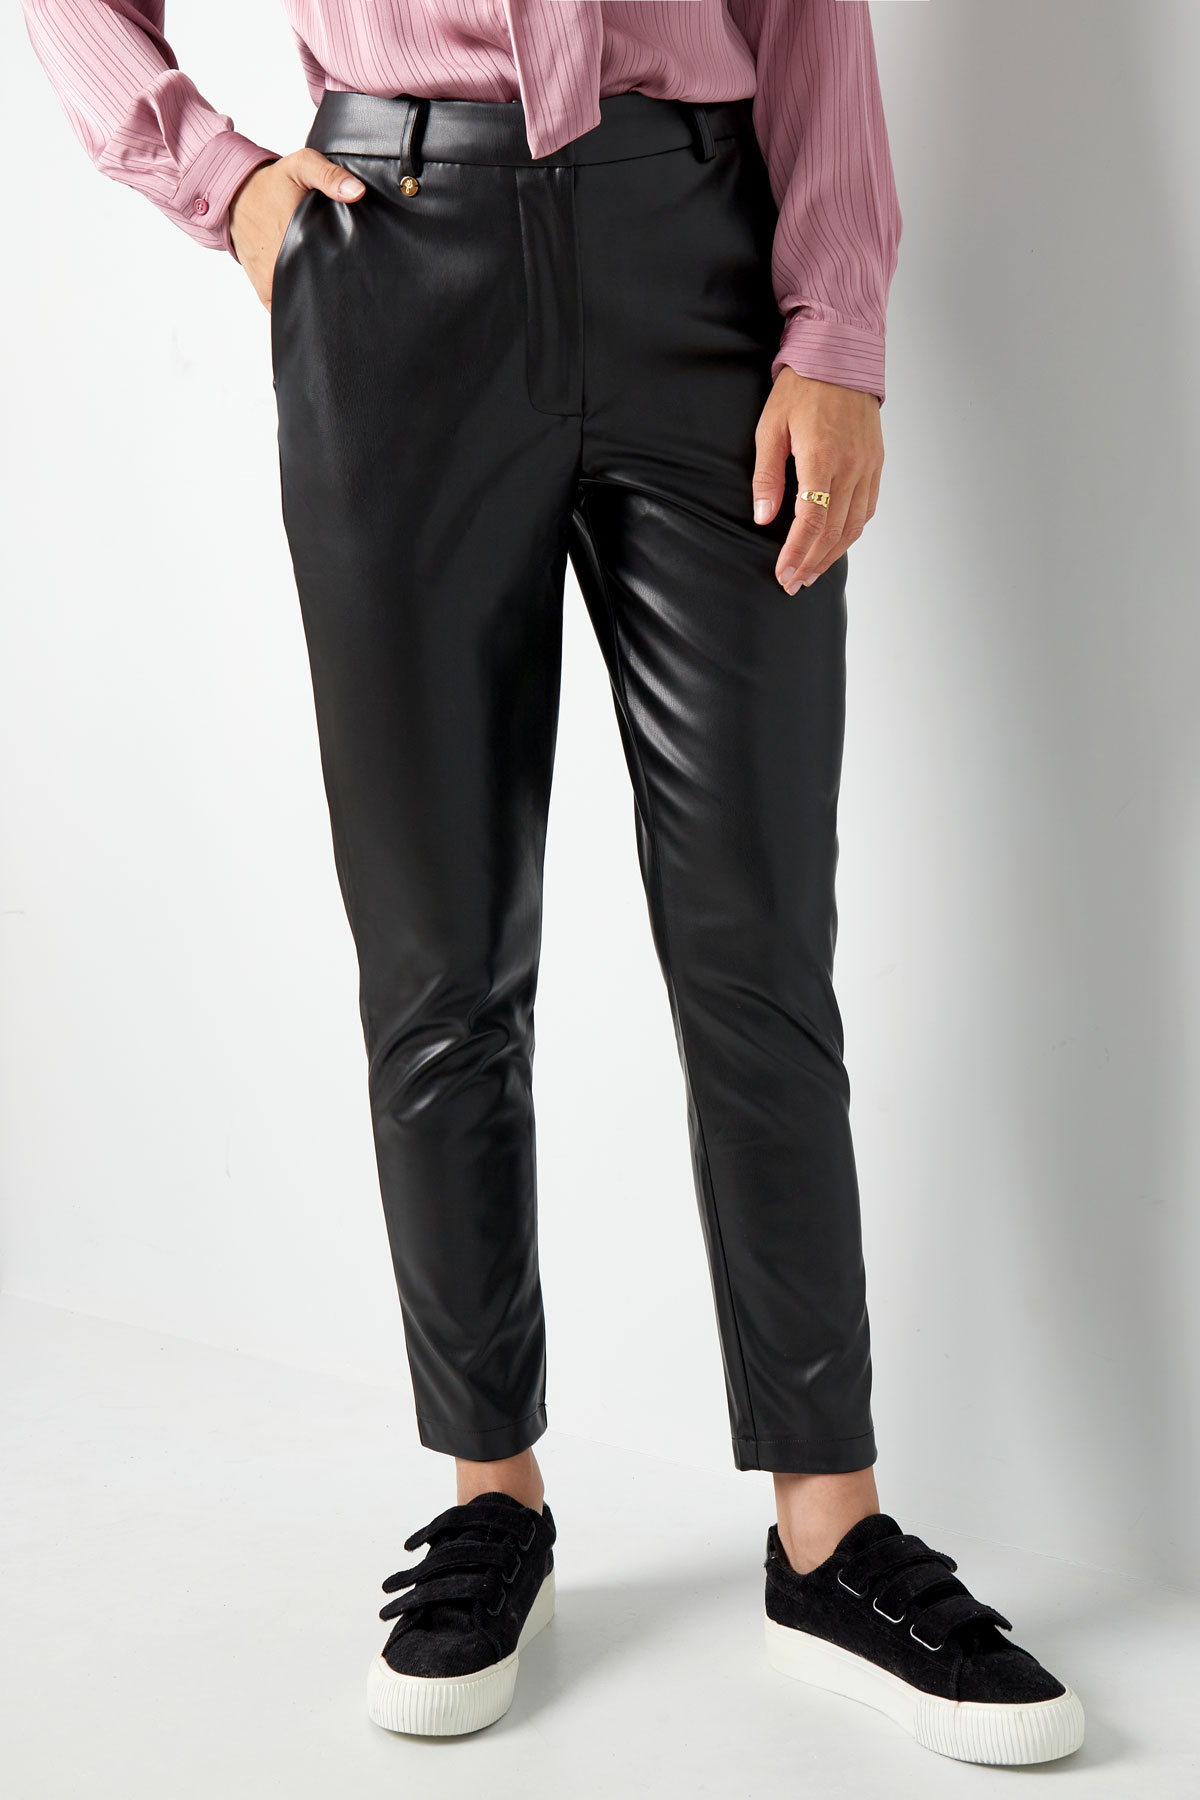 PU leather pants - black h5 Picture2